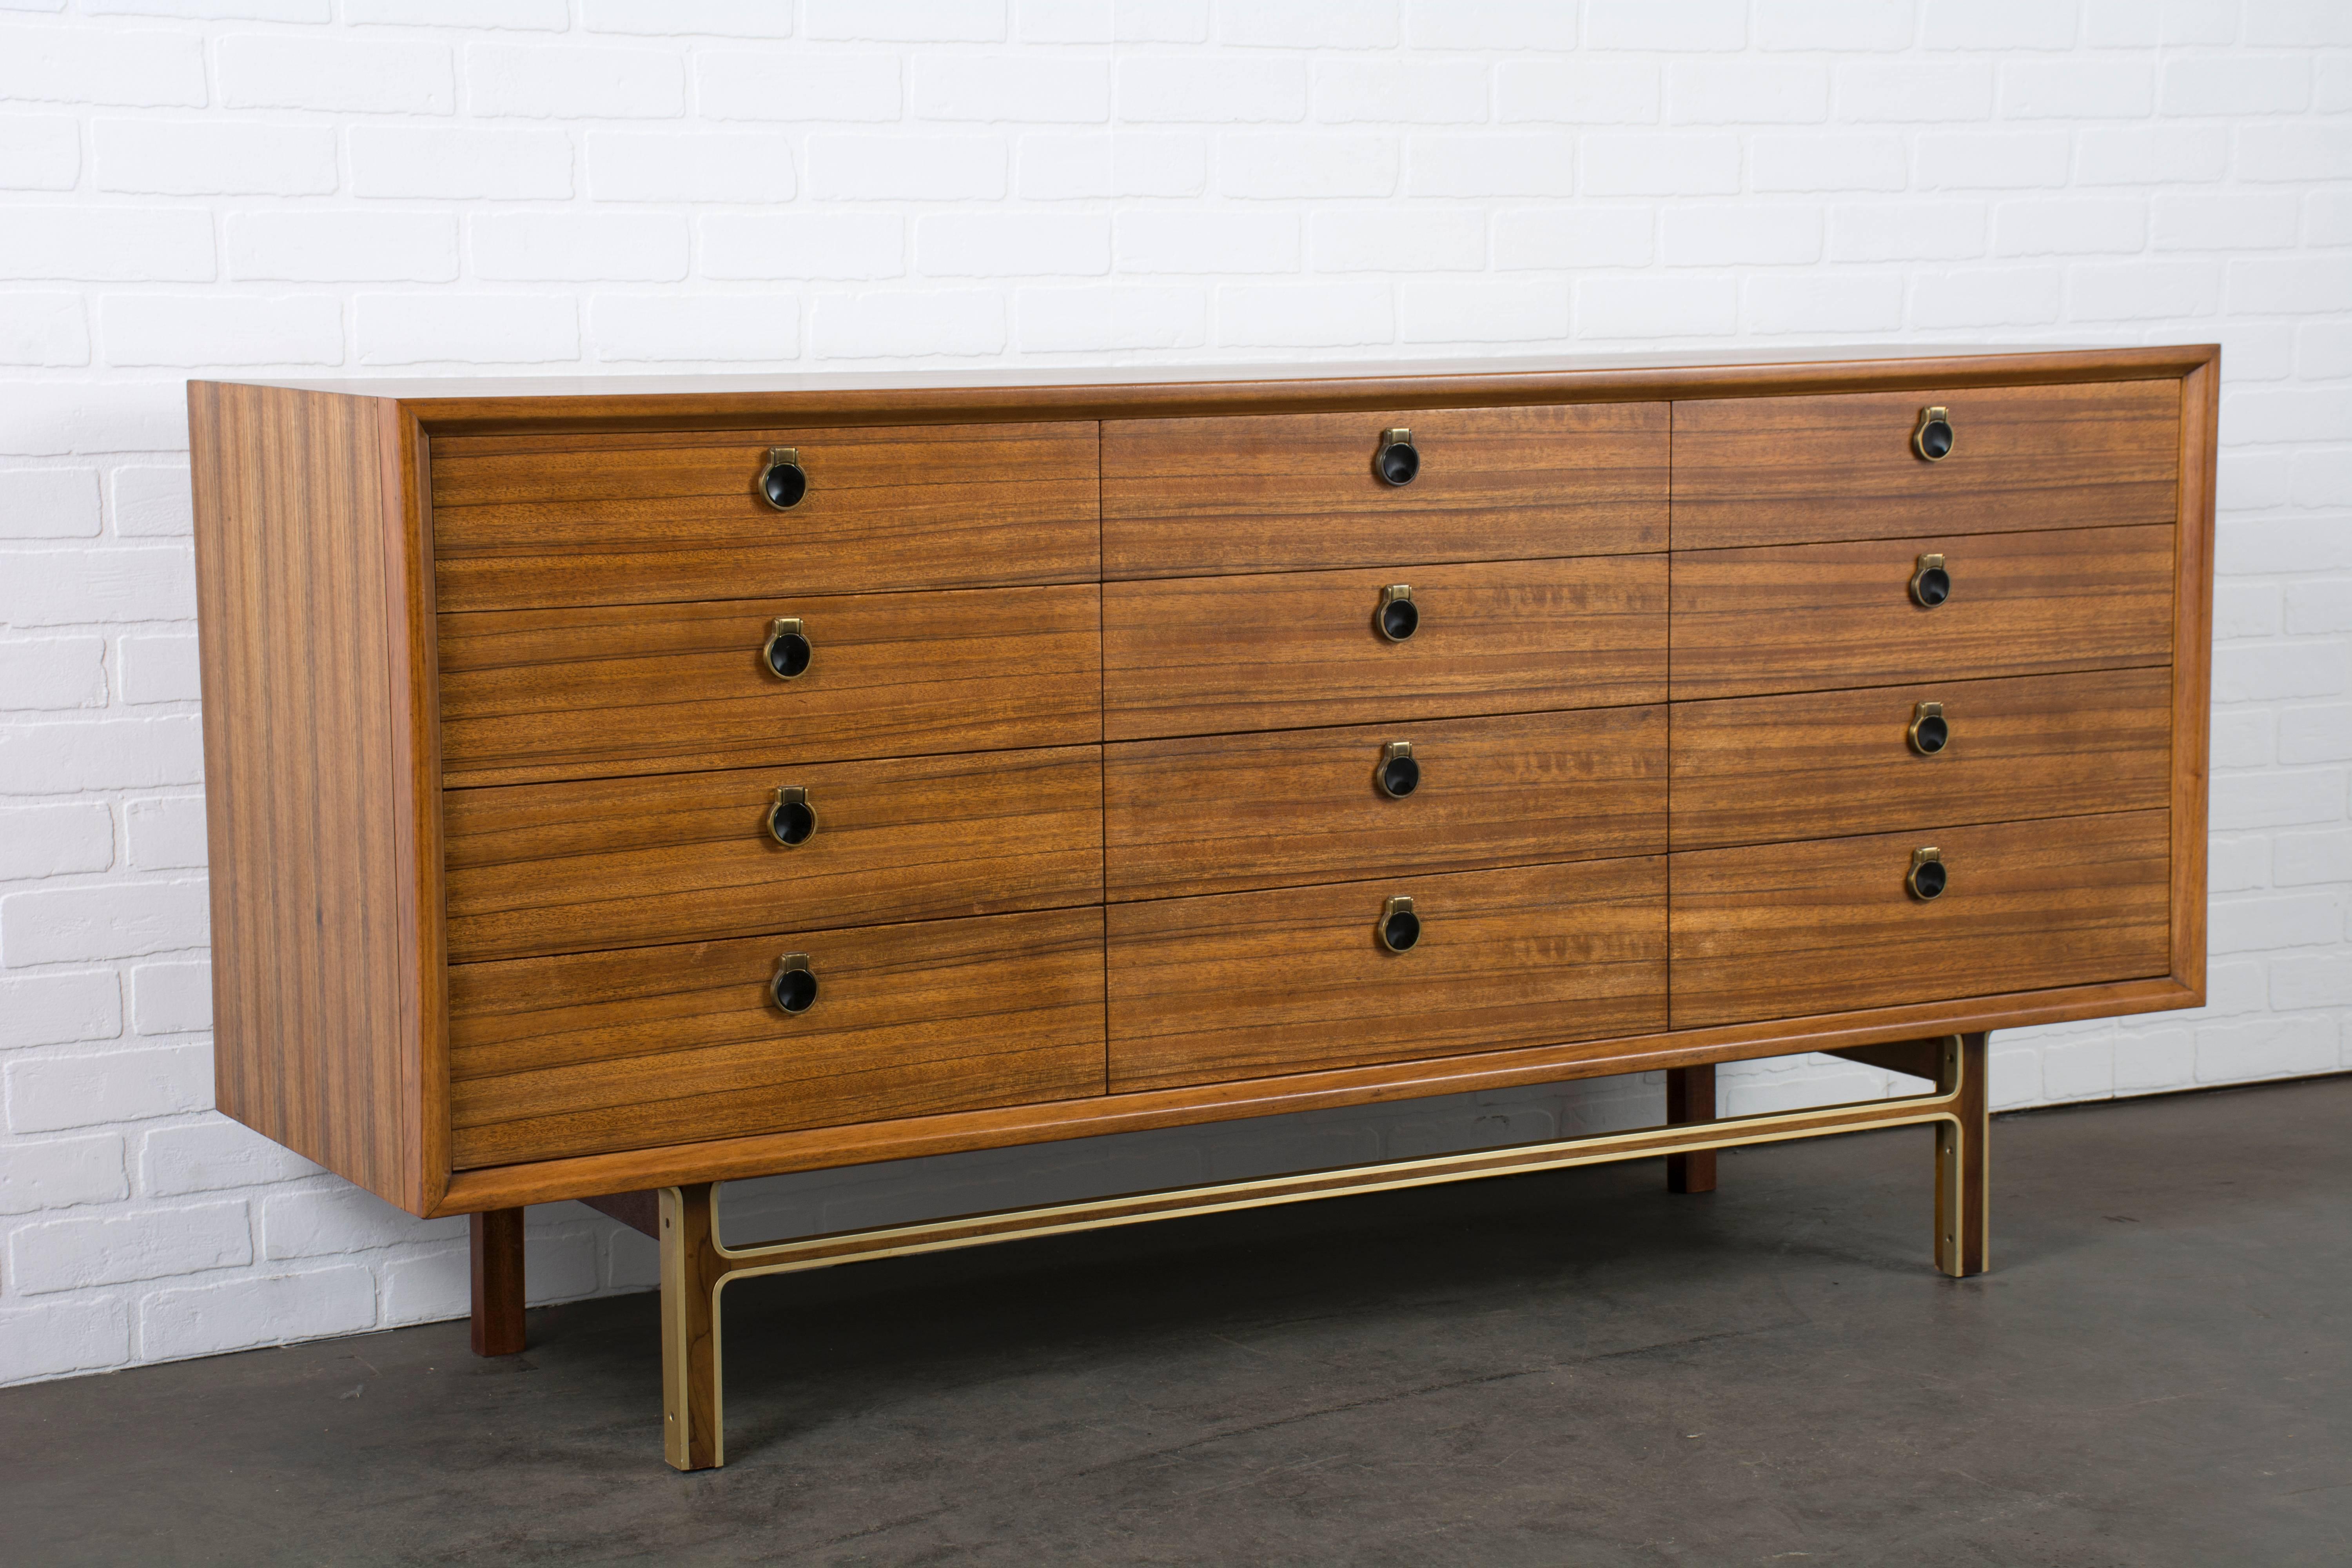 This Mid-Century Modern low mahogany dresser features 12 drawers (one drawer with dividers) and brass accents.